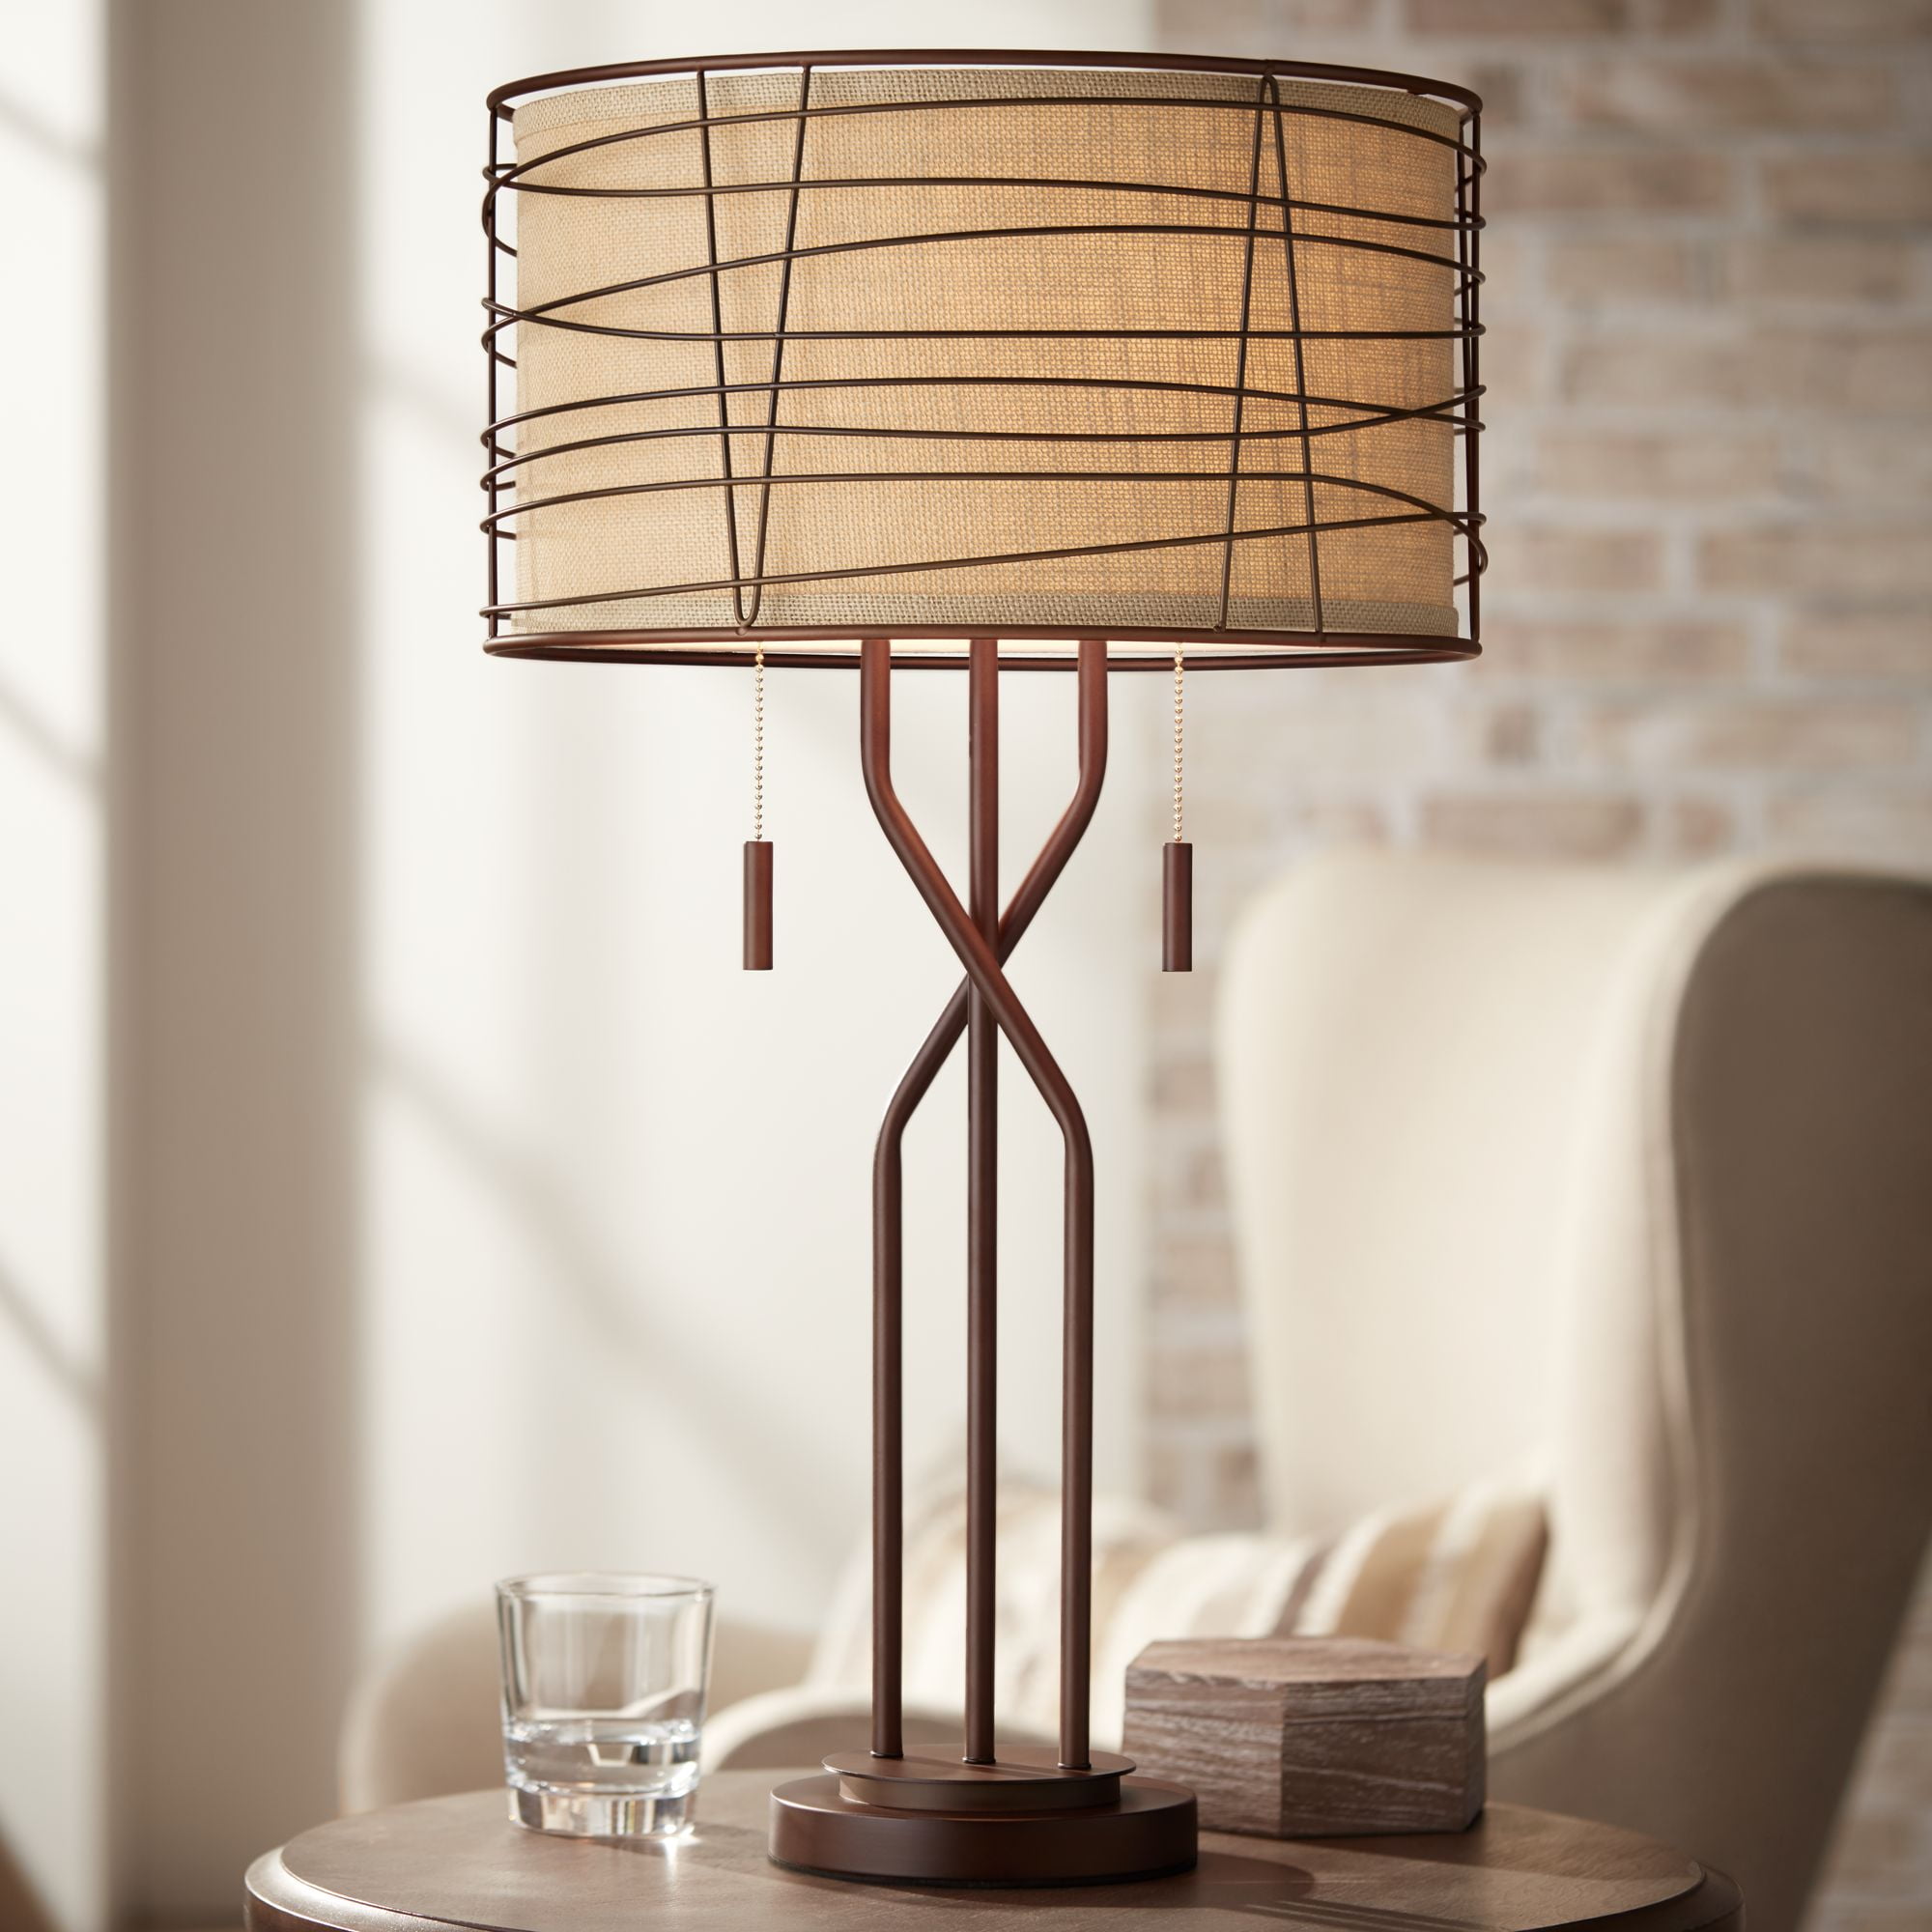 Franklin Iron Works Modern Table Lamp, Industrial Bronze Iron Table Lamp With Beige Hardback Shade